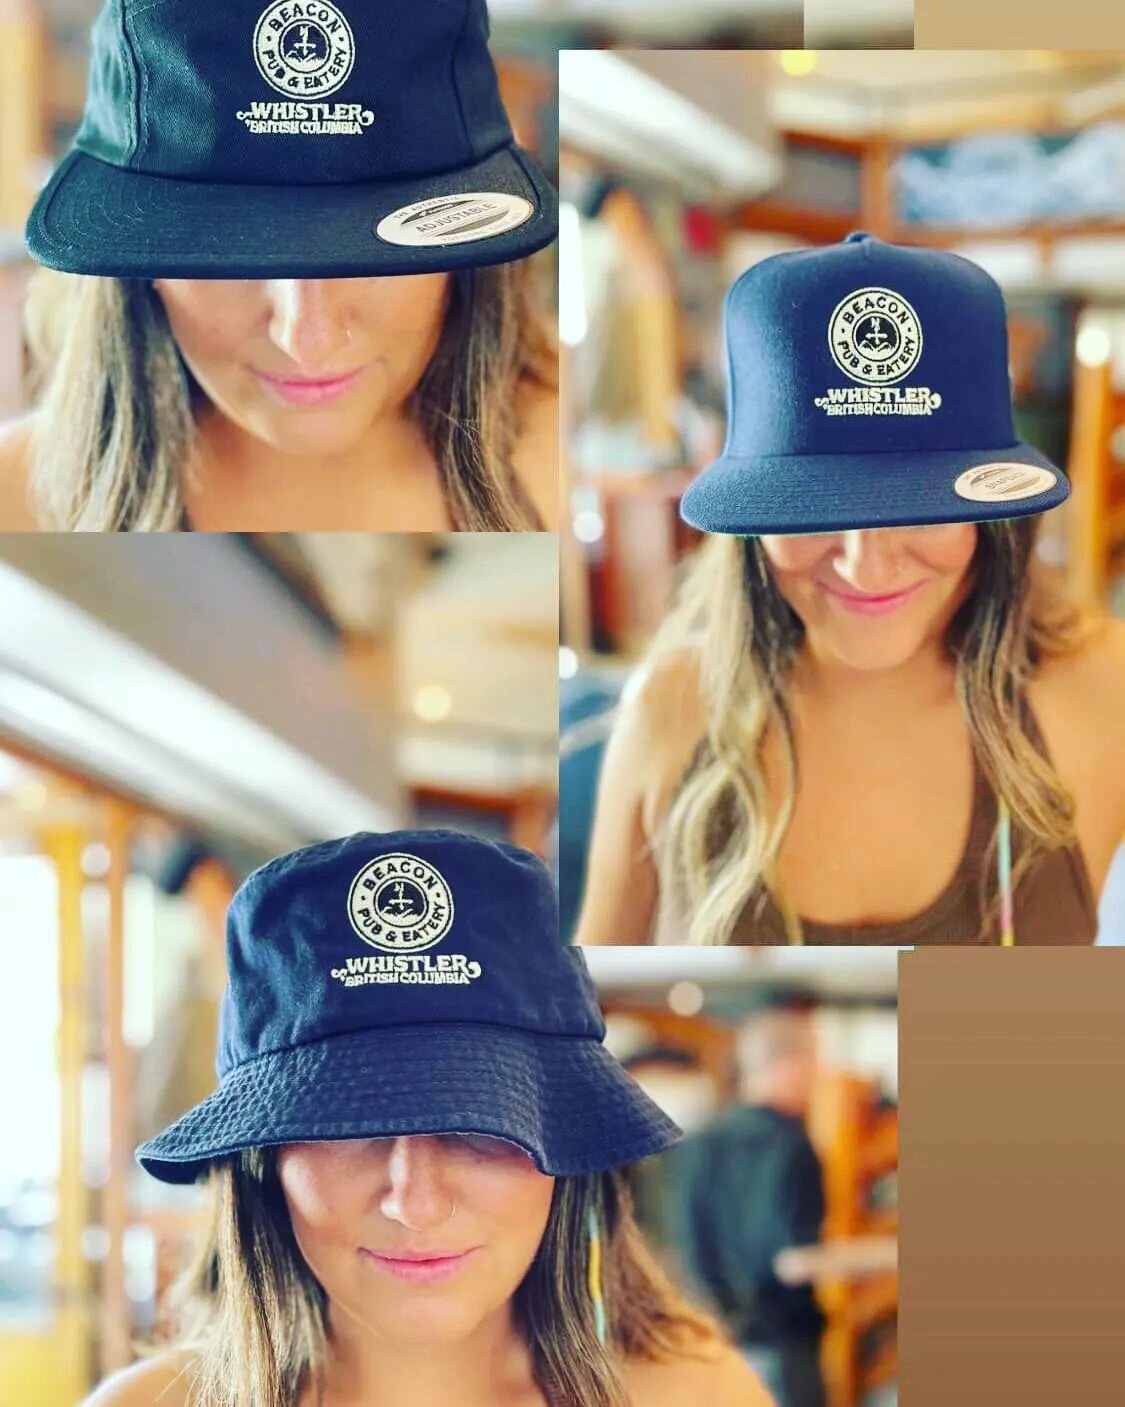 The sun is still shinning! We've got the perfect hat for your summer style☀️
Come see us today to purchase your very own bucket, 5 panel or trucker hat! May as well have a cold one on the patio while you are here🍻

#allroadsleadtothebeacon #holdonto